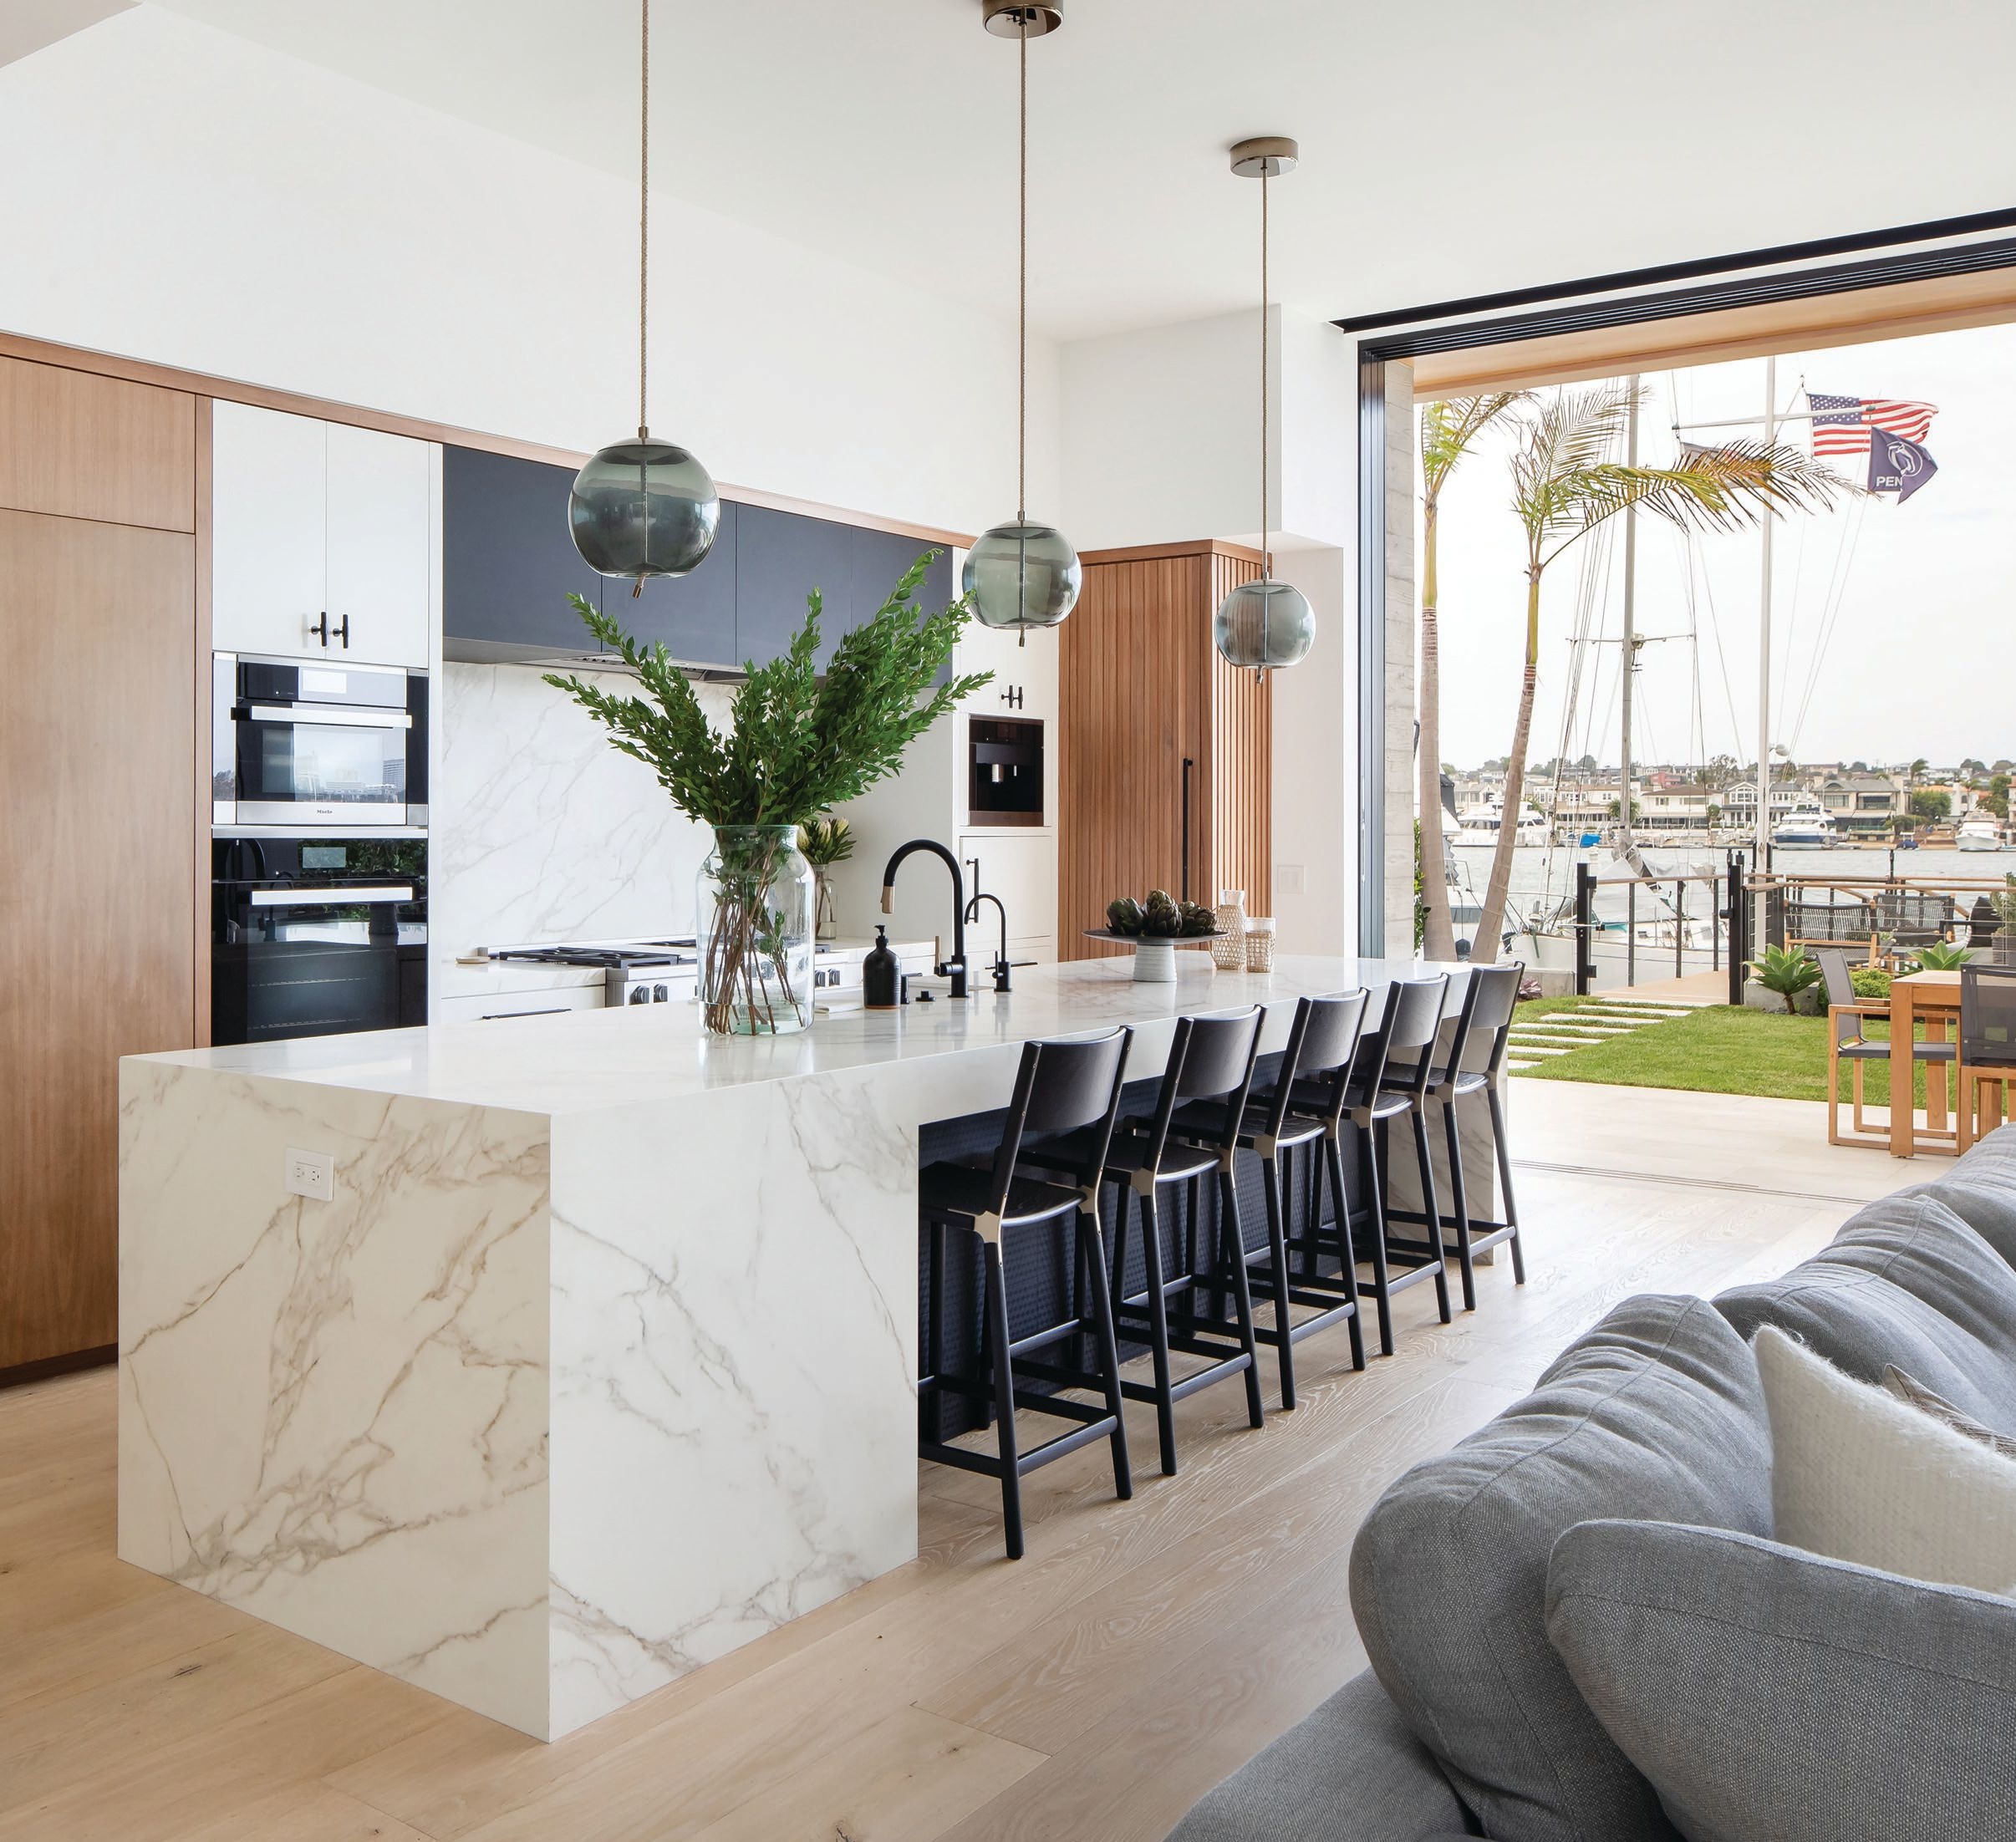 The gourmet chef’s kitchen invites up to five guests to take a seat at the sprawling
island PHOTOGRAPHED BY RYAN GARVIN